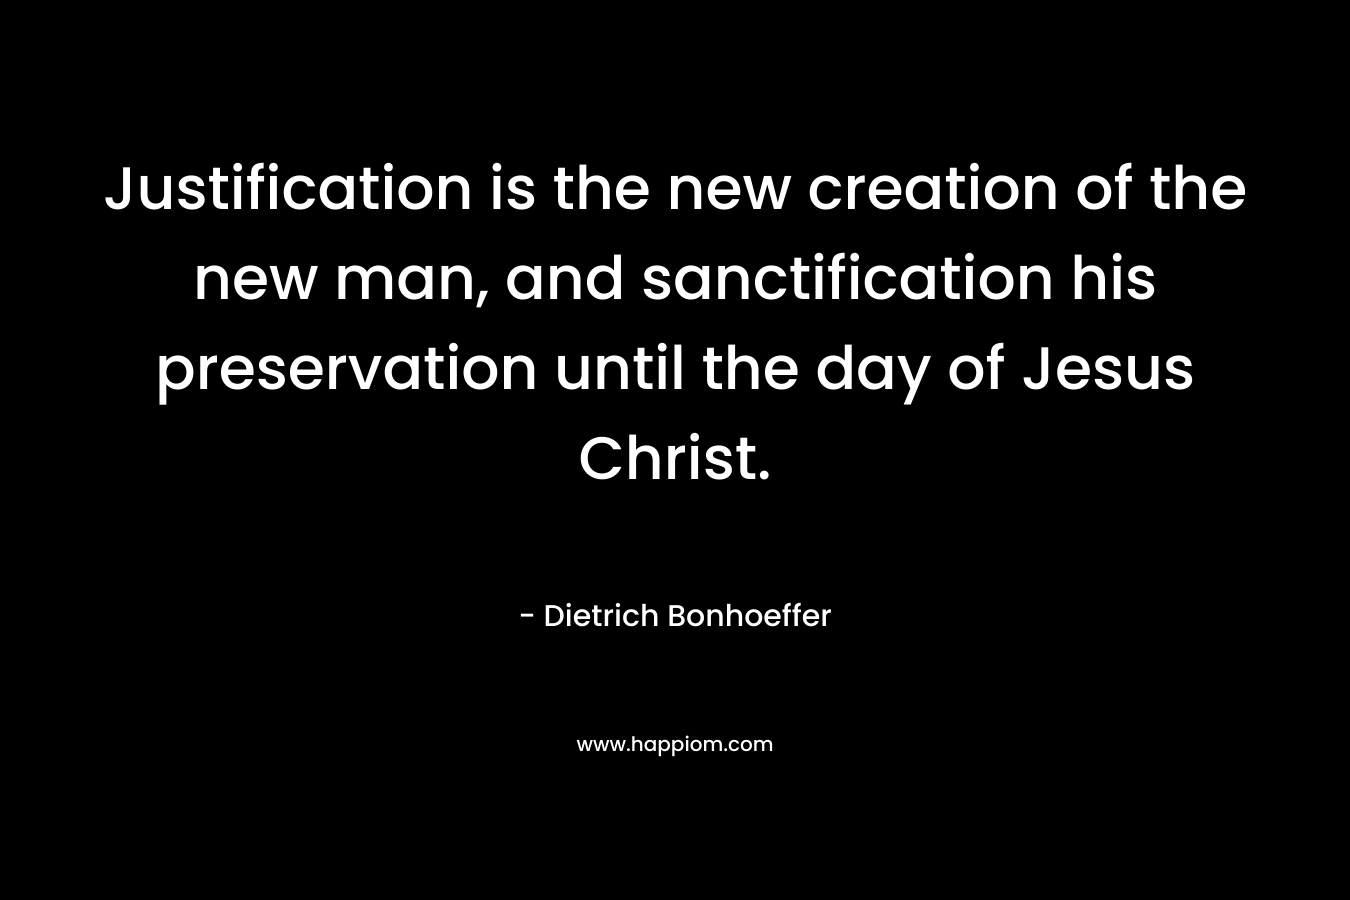 Justification is the new creation of the new man, and sanctification his preservation until the day of Jesus Christ. – Dietrich Bonhoeffer